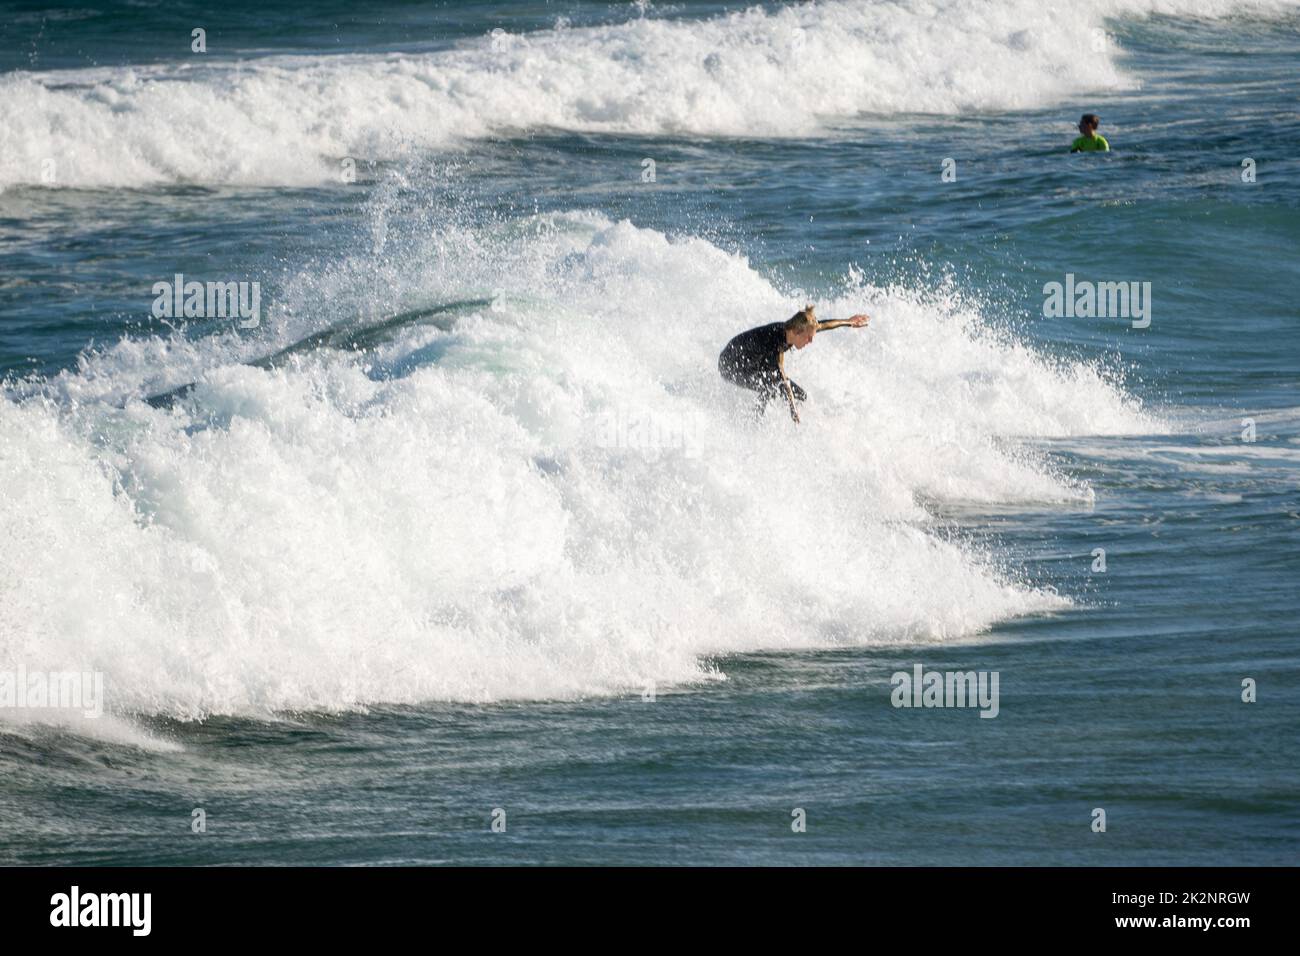 A surfer catching waves on the water near Maroubra Beach Stock Photo